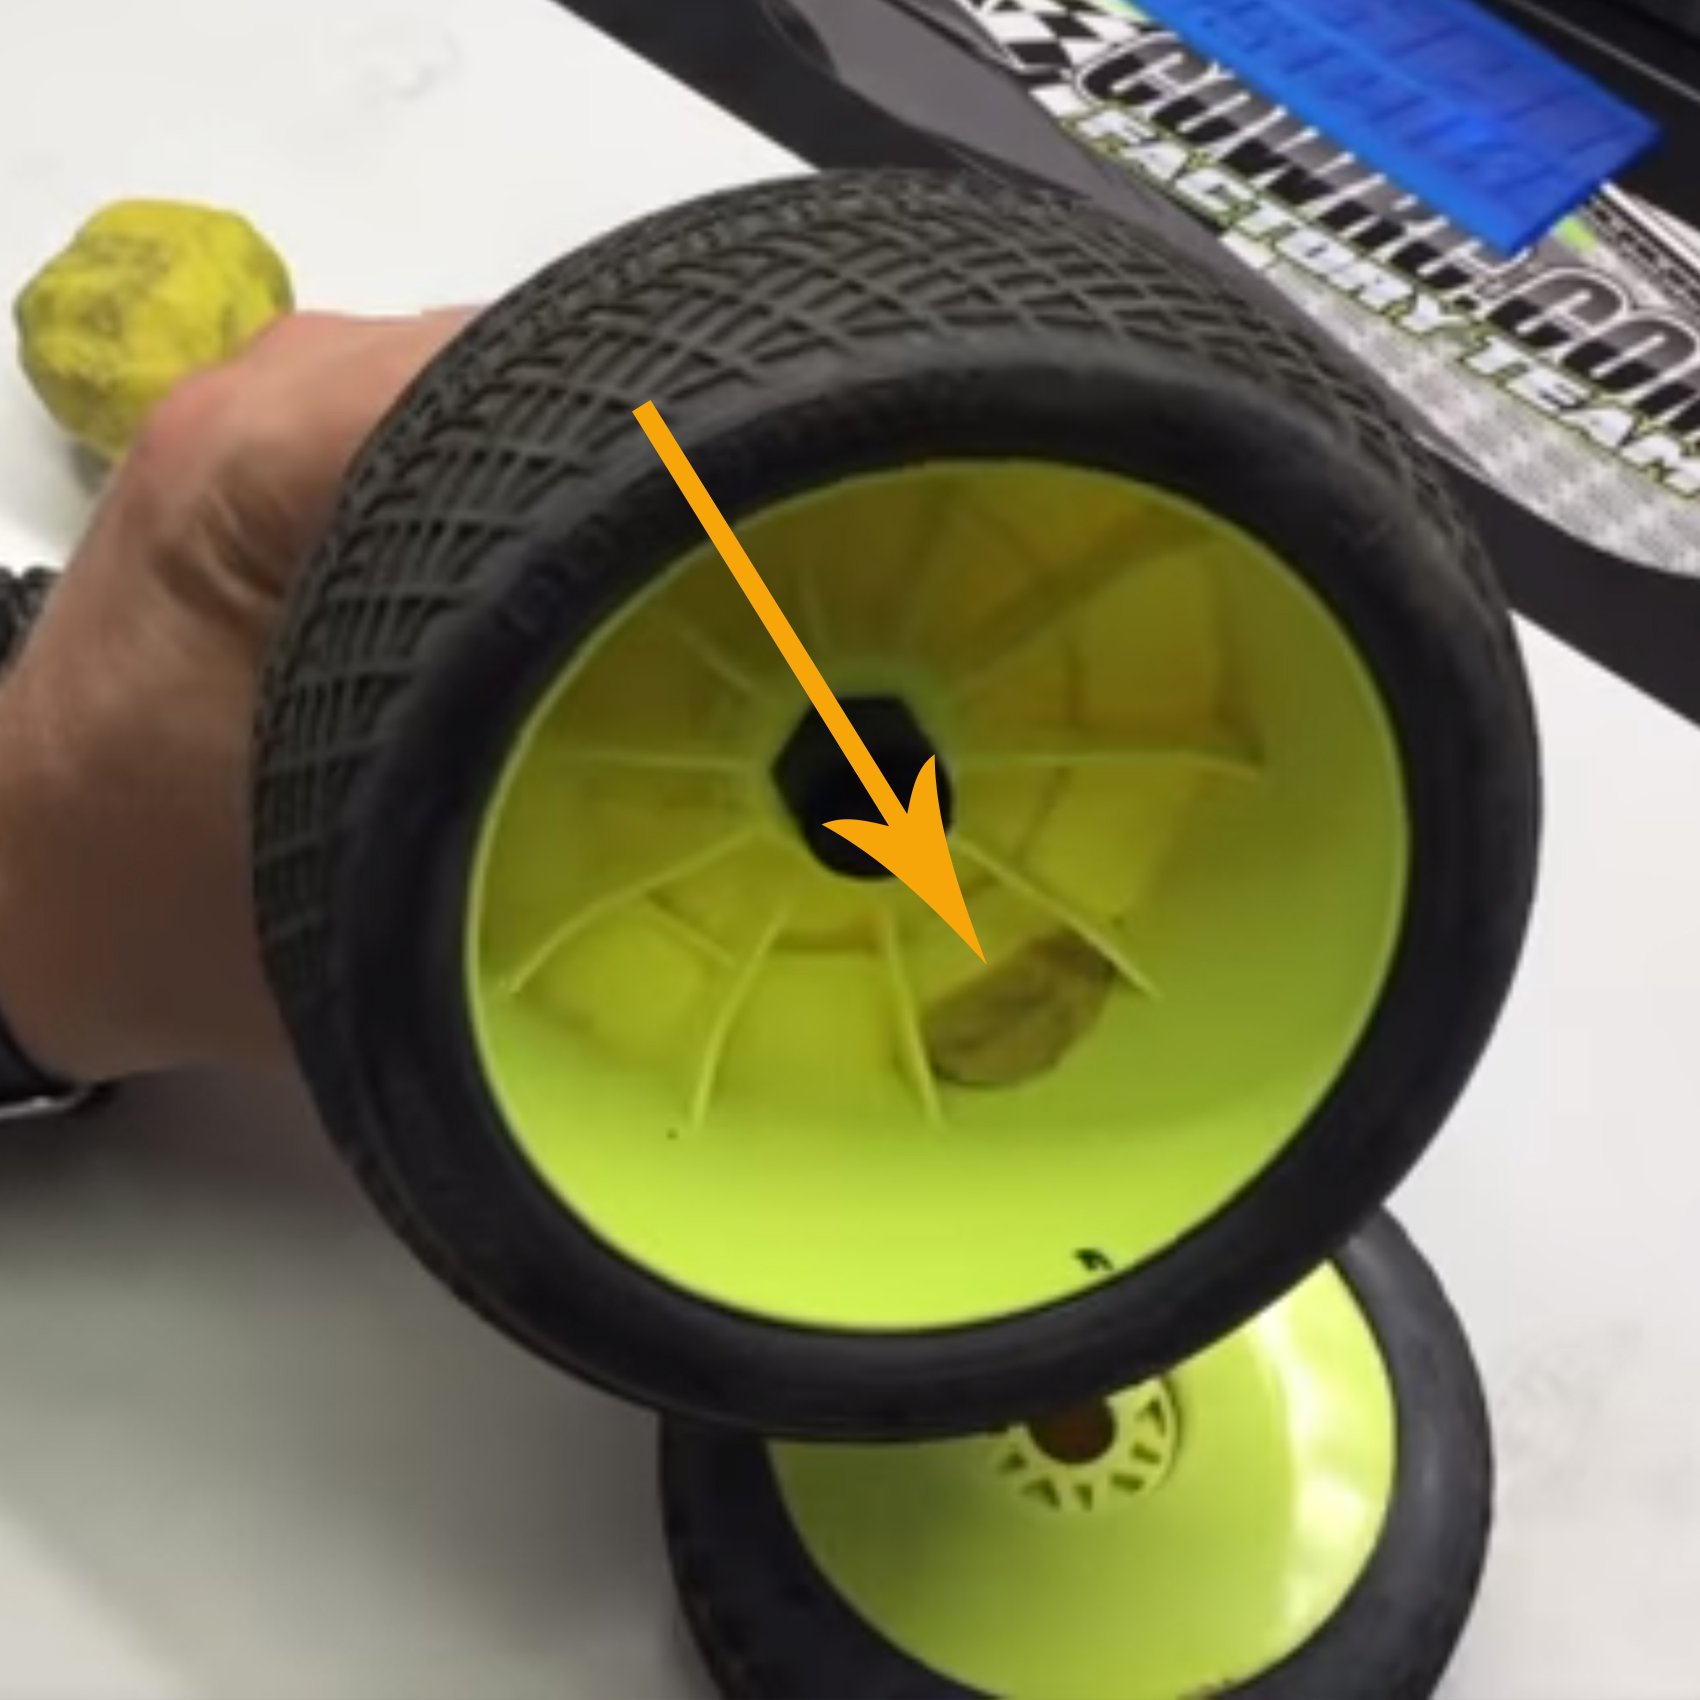 Using Putty to Fix Unbalanced RC Tires